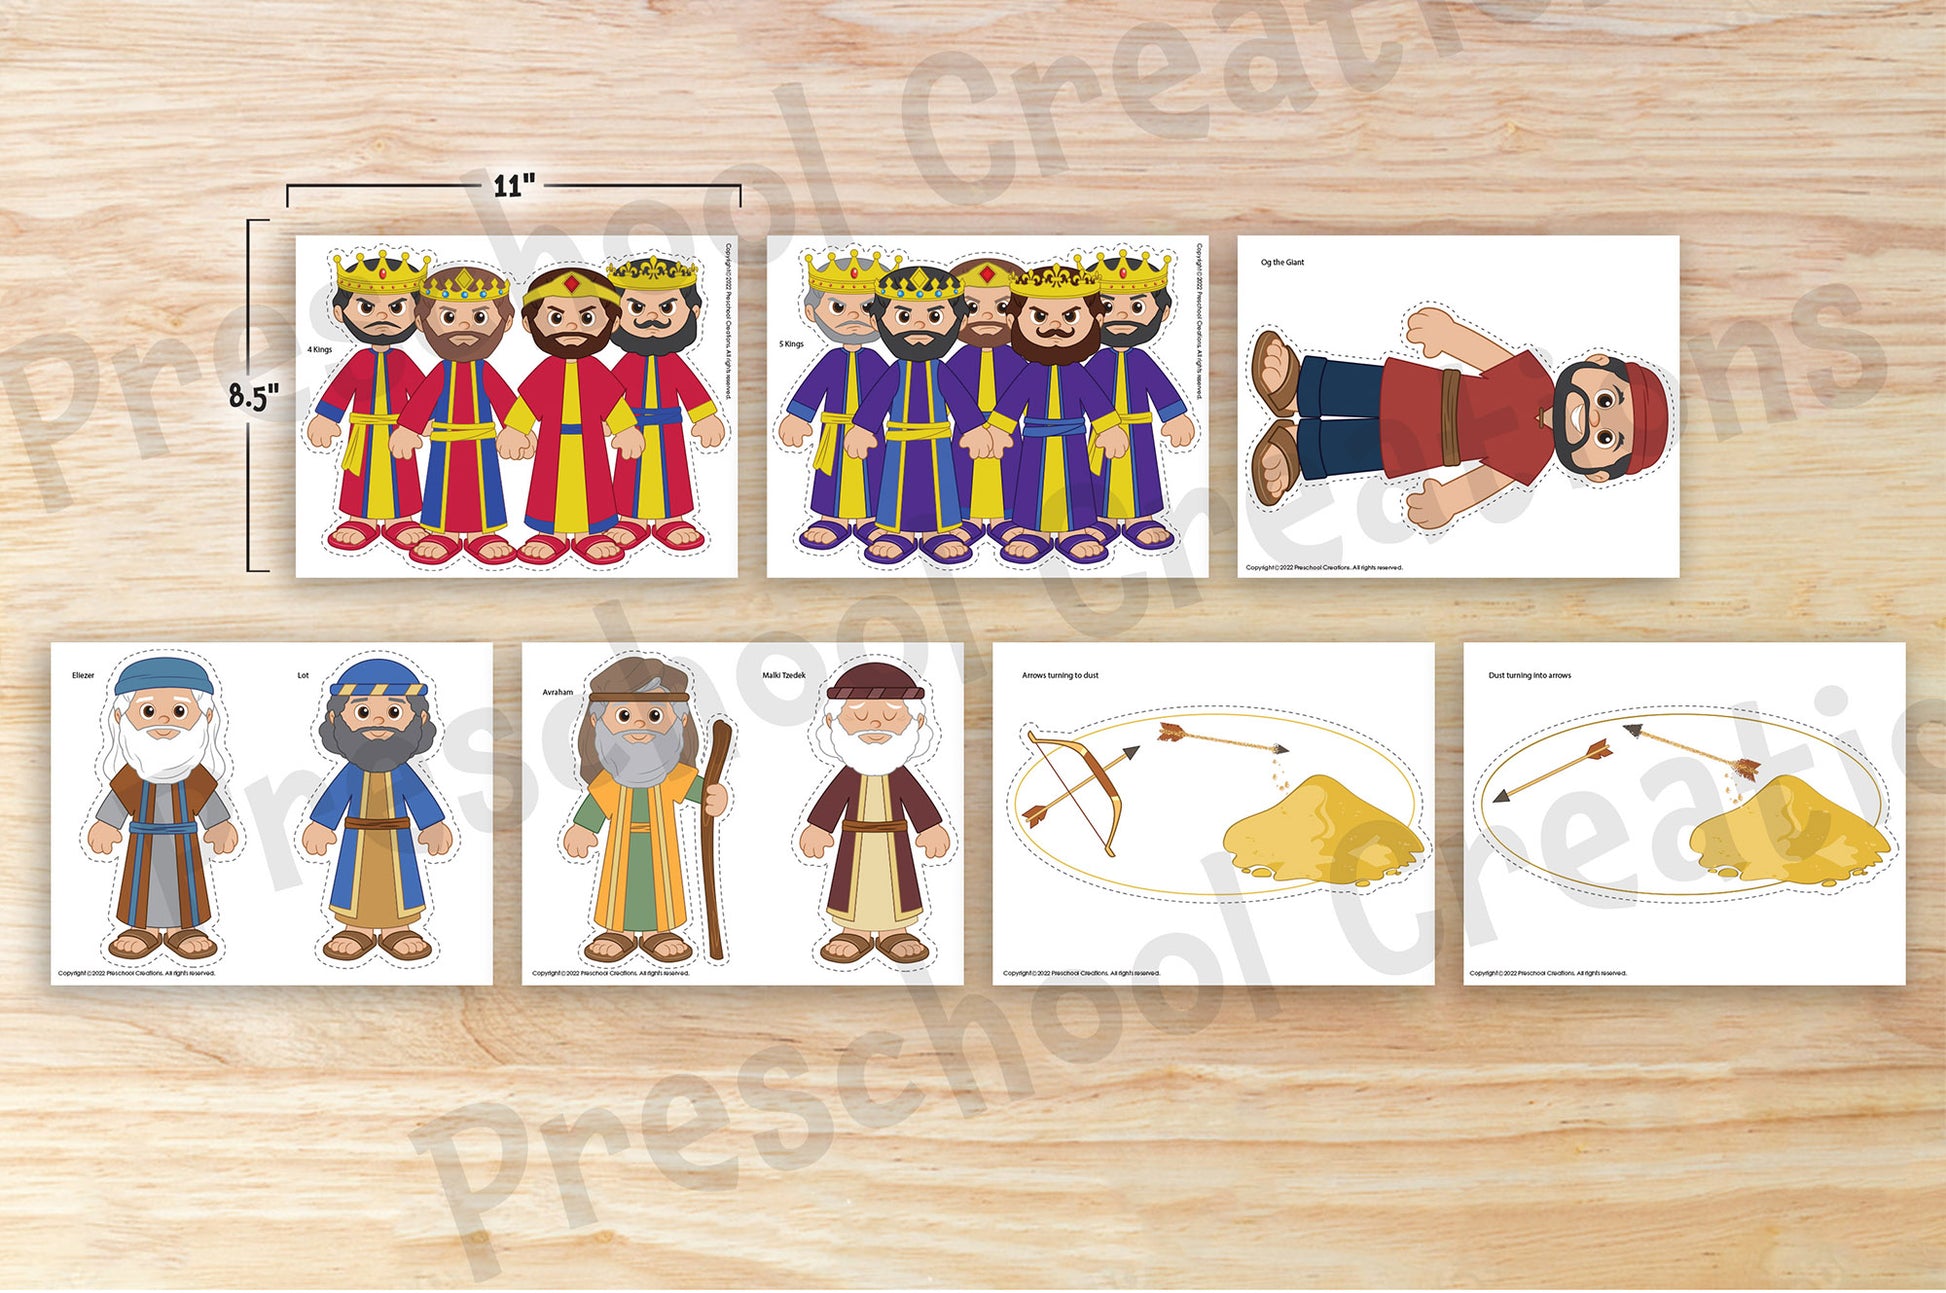 7 Full color pages of puppets and props for Parshas Lech Lecha, perek 14. The story of the war of the 4 kings and 5 kings and Avraham coming to save Lot.  Bring your chumash lessons to life with these adorable puppets and engaging artwork that will instantly upgrade your lessons and take them to the next level. Teaching Chumash is now so much easier and hands on!  This set includes:  4 kings  5 kings  Avraham  Eliezer  Lot  Malki Tzedek  Og  Arrows turning to dust  Dust turning into arrows